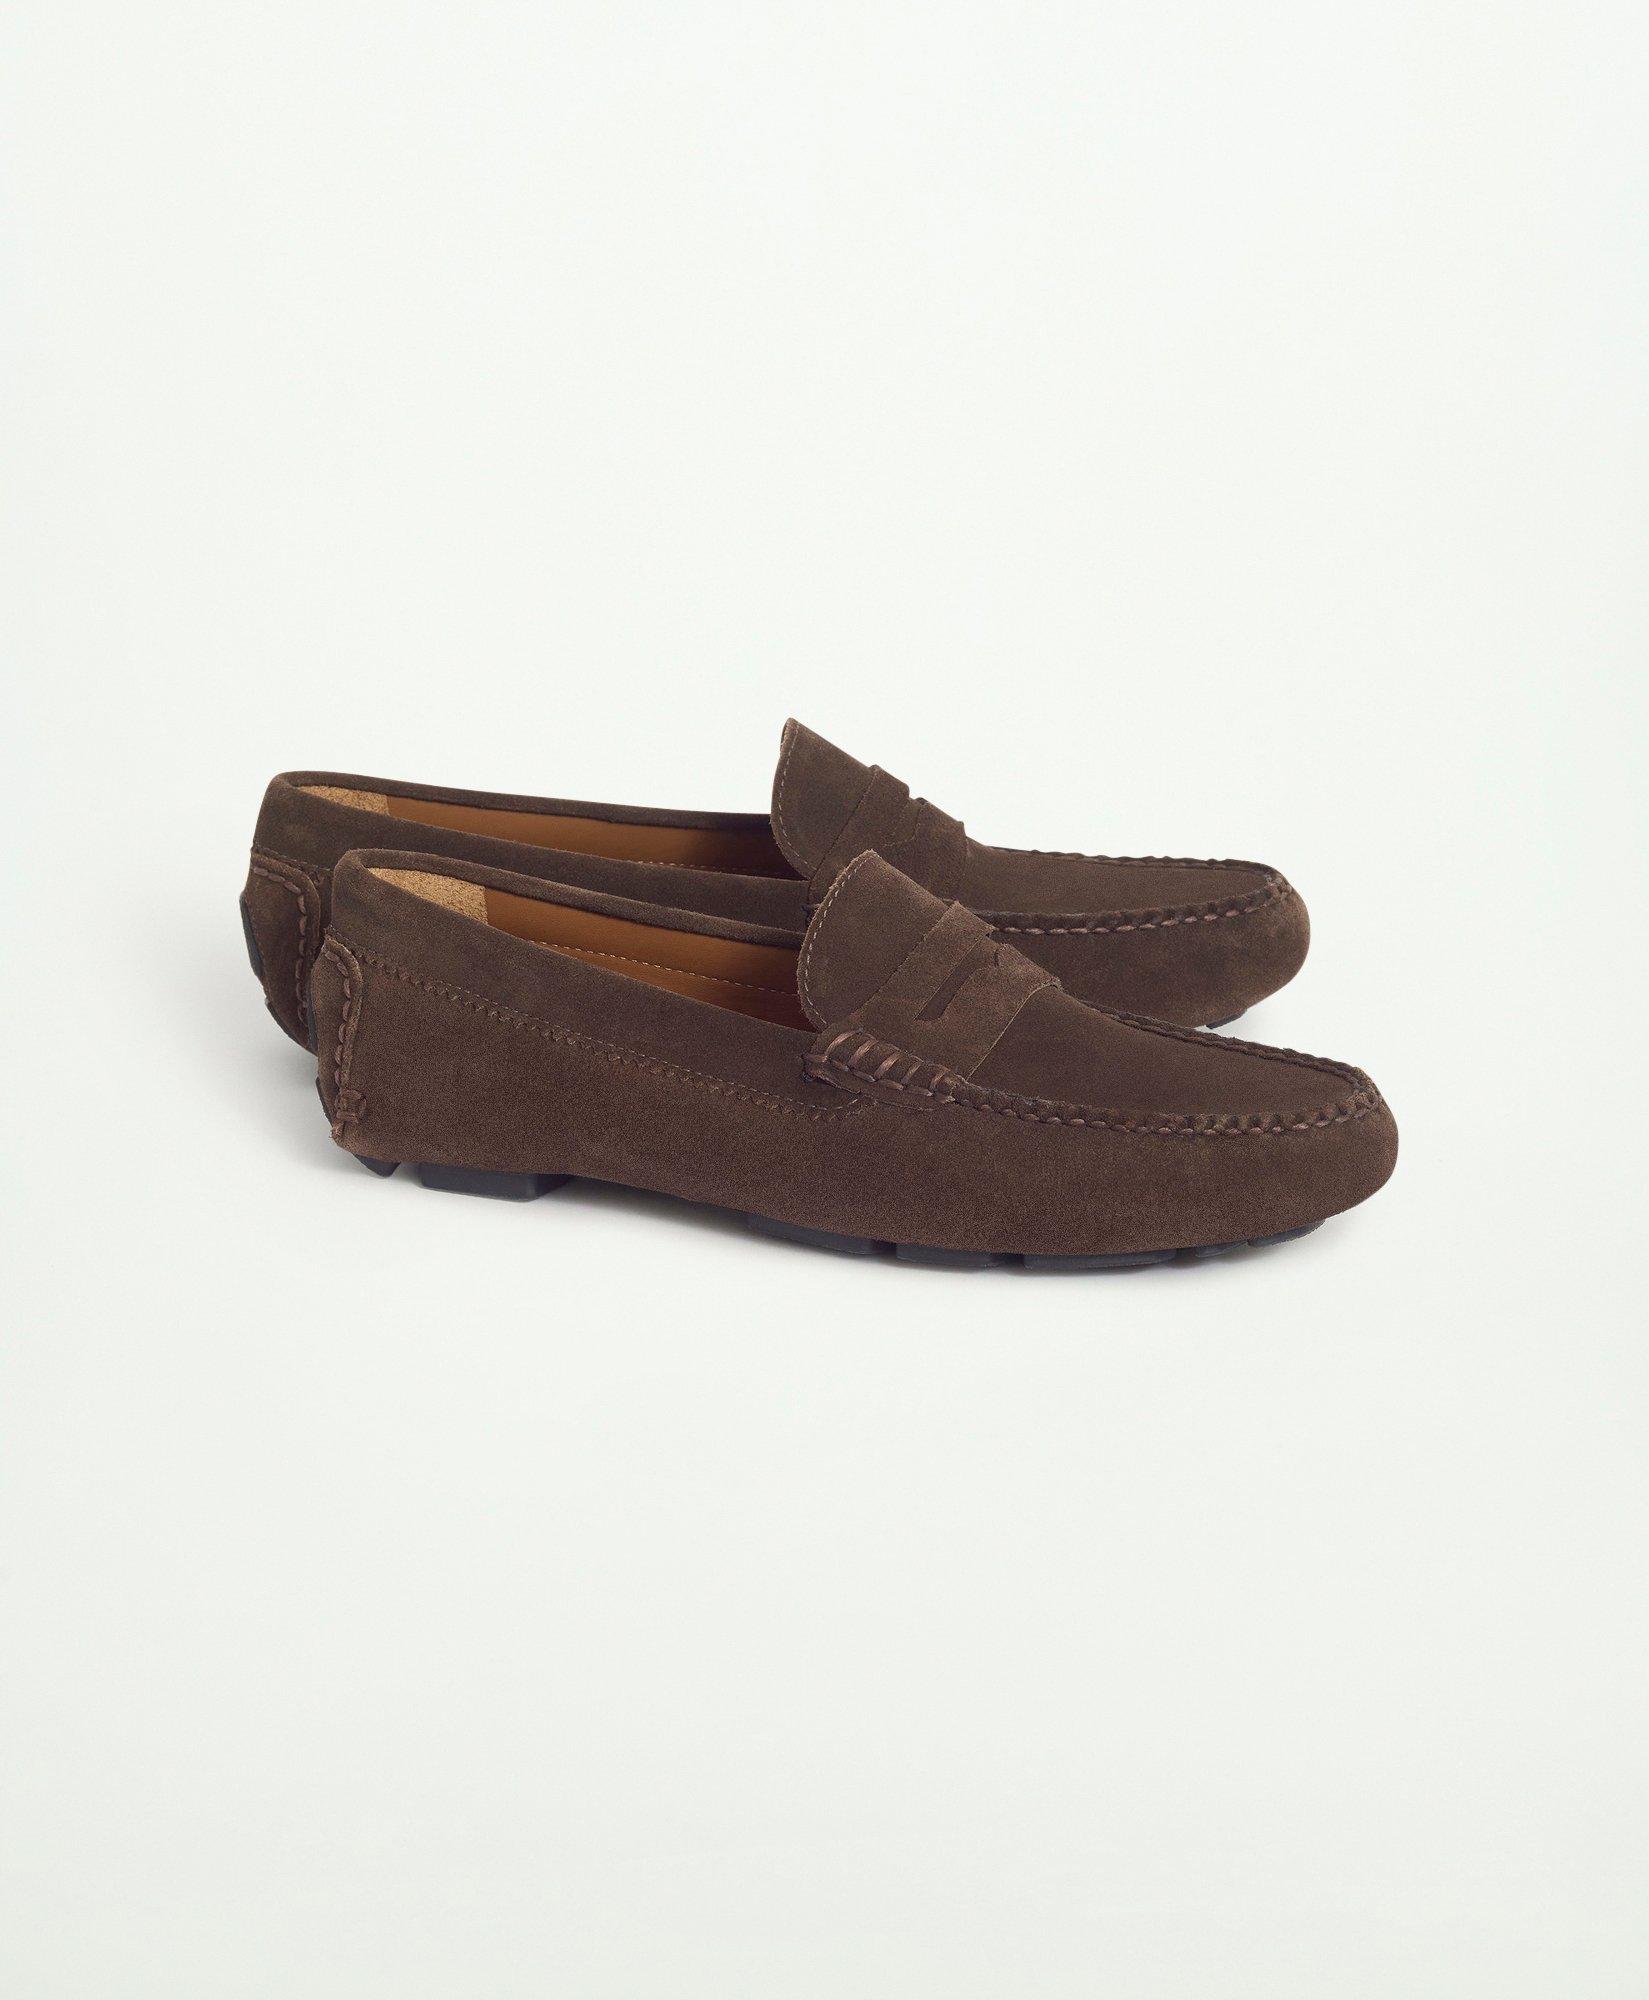 Brooks Brothers Bellport Driving Moc Shoes | Brown | Size 10 D